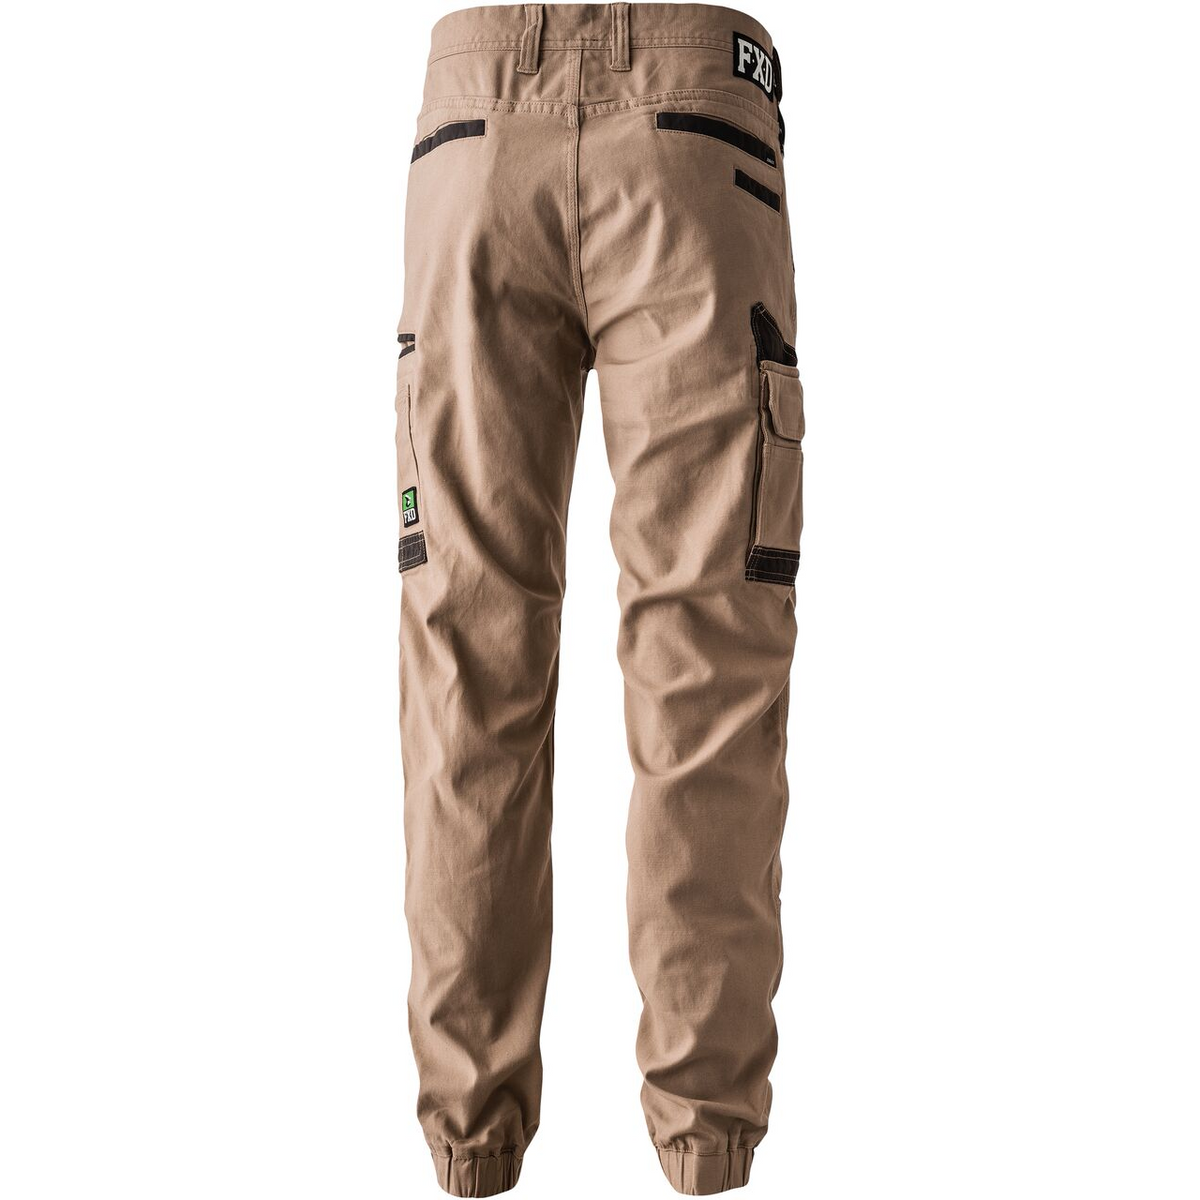 FXD Cuffed Stretch Work Pant - WP-4